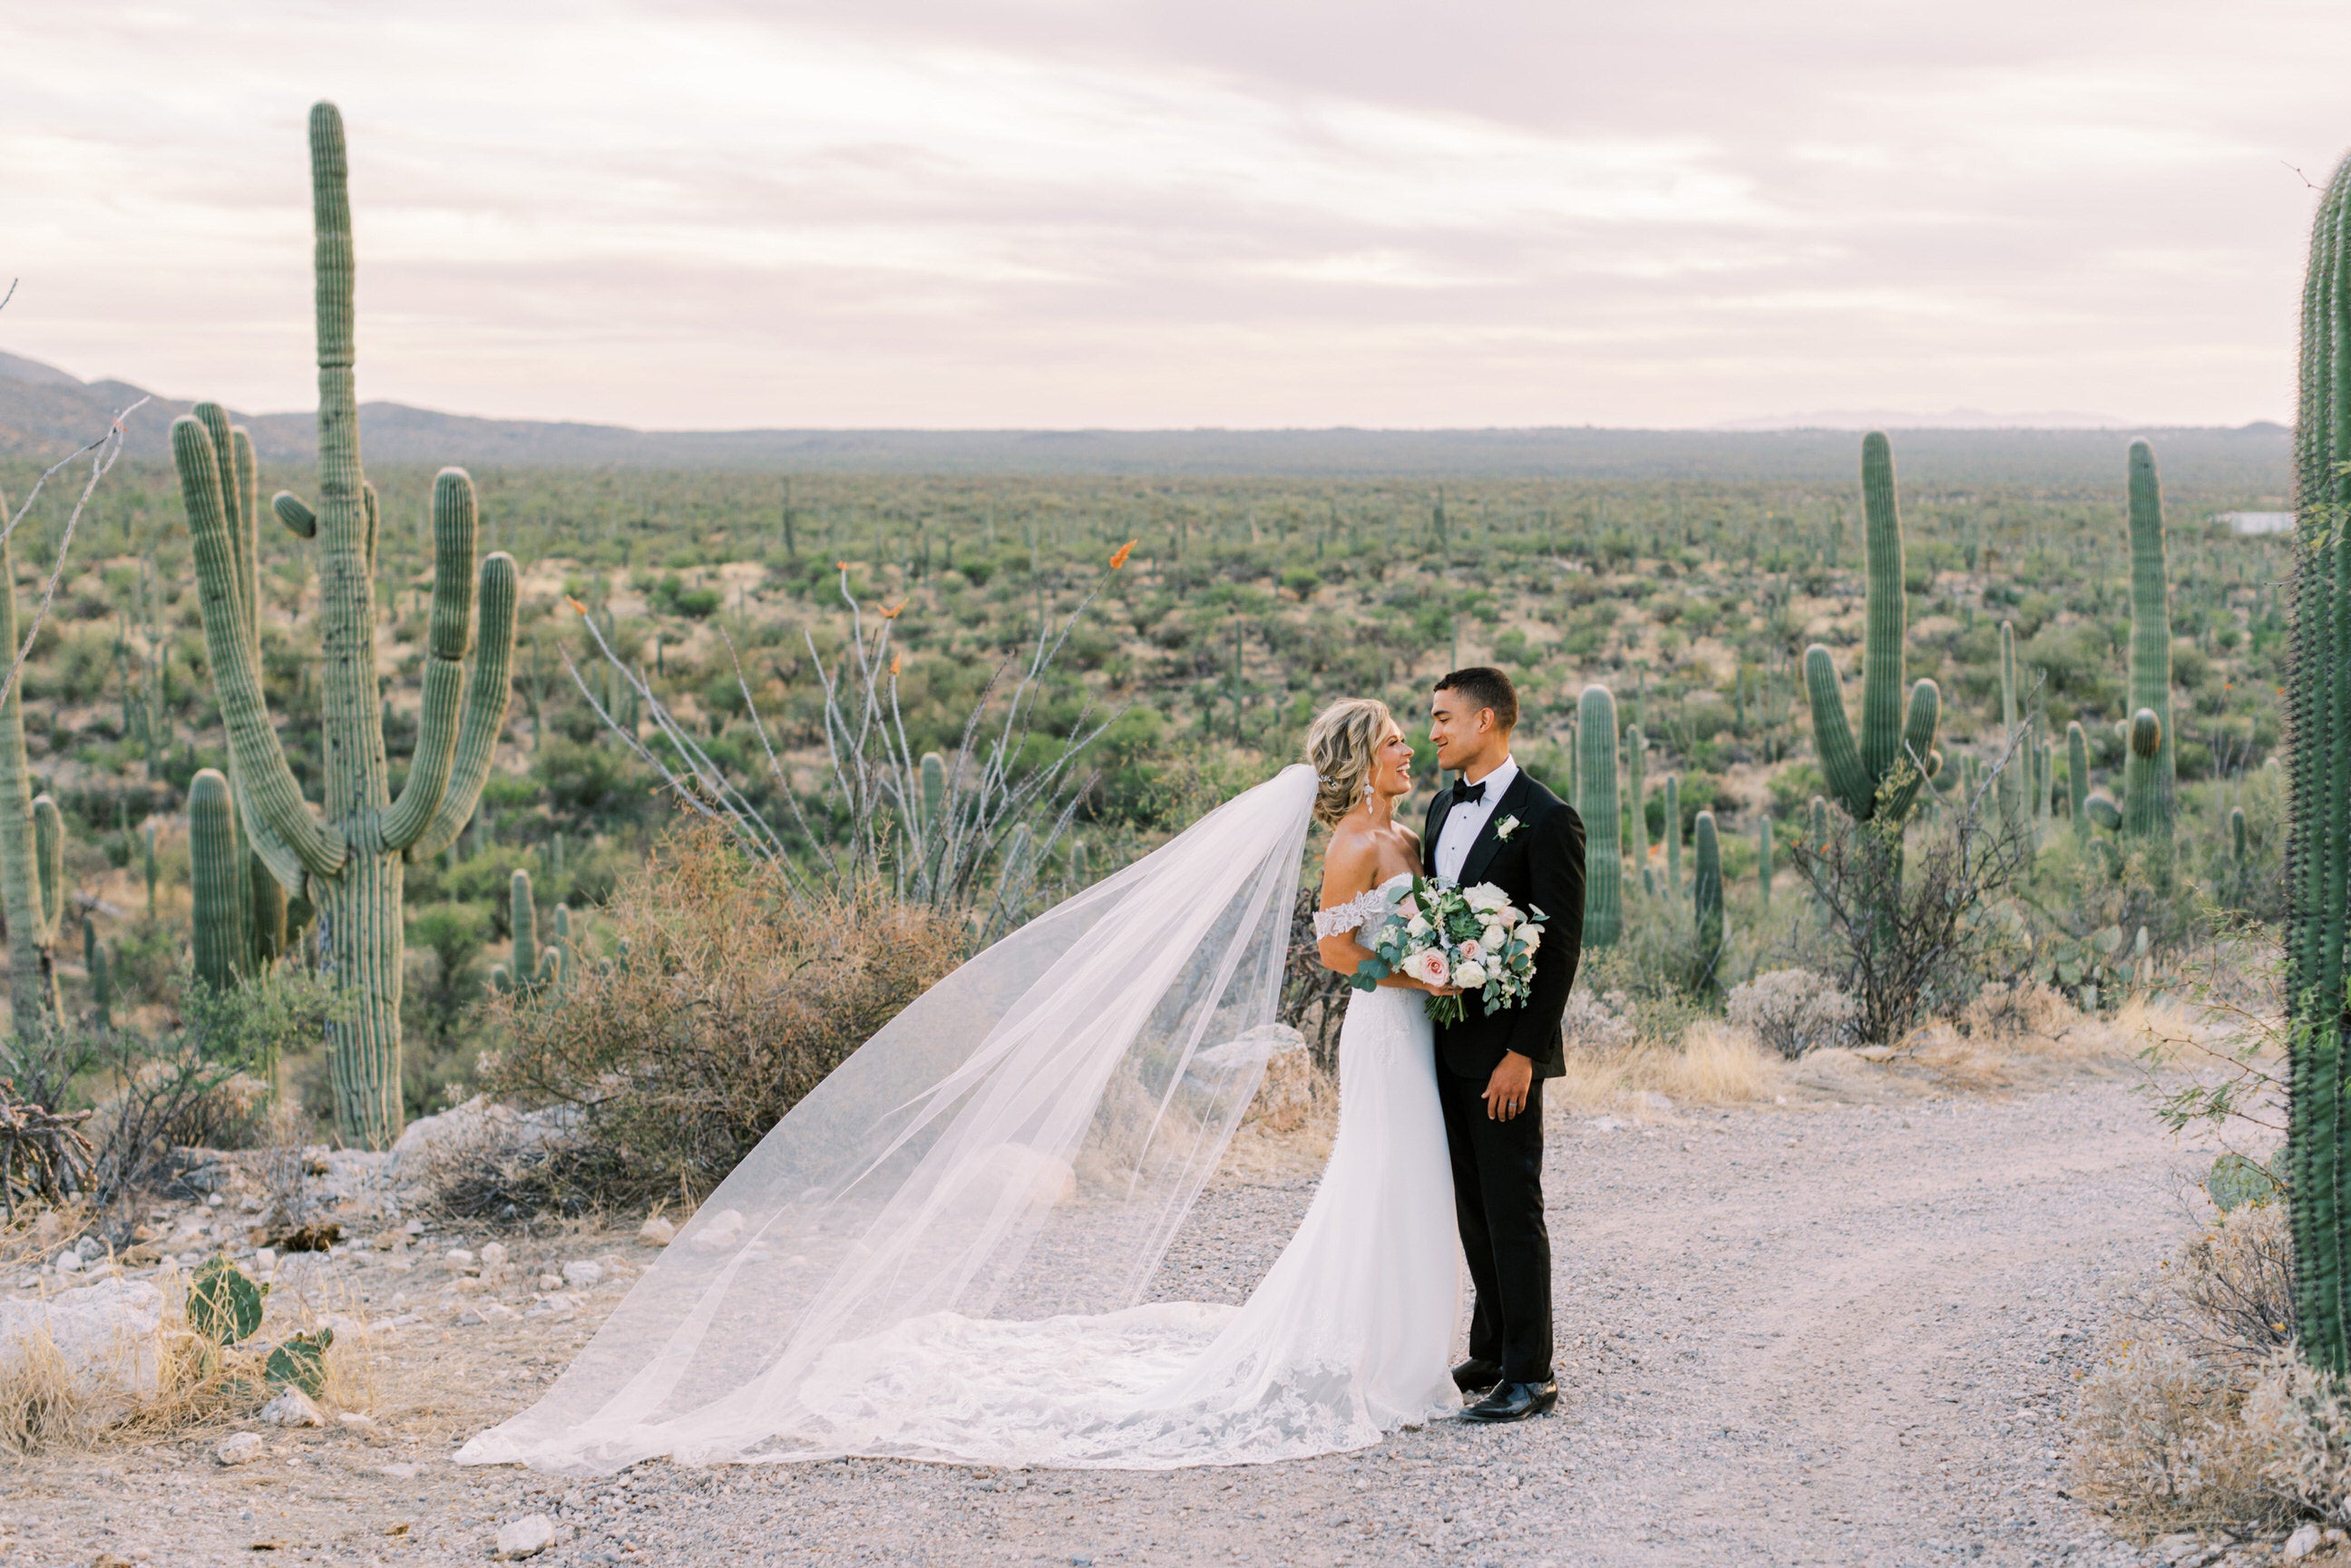 http://www.oneblushingbride.net/cdn/shop/articles/scenic_desert_wedding_with_lace_gown_and_long_cathedral_length_lace_wedding_veil_JOY-933.jpg?v=1655850247